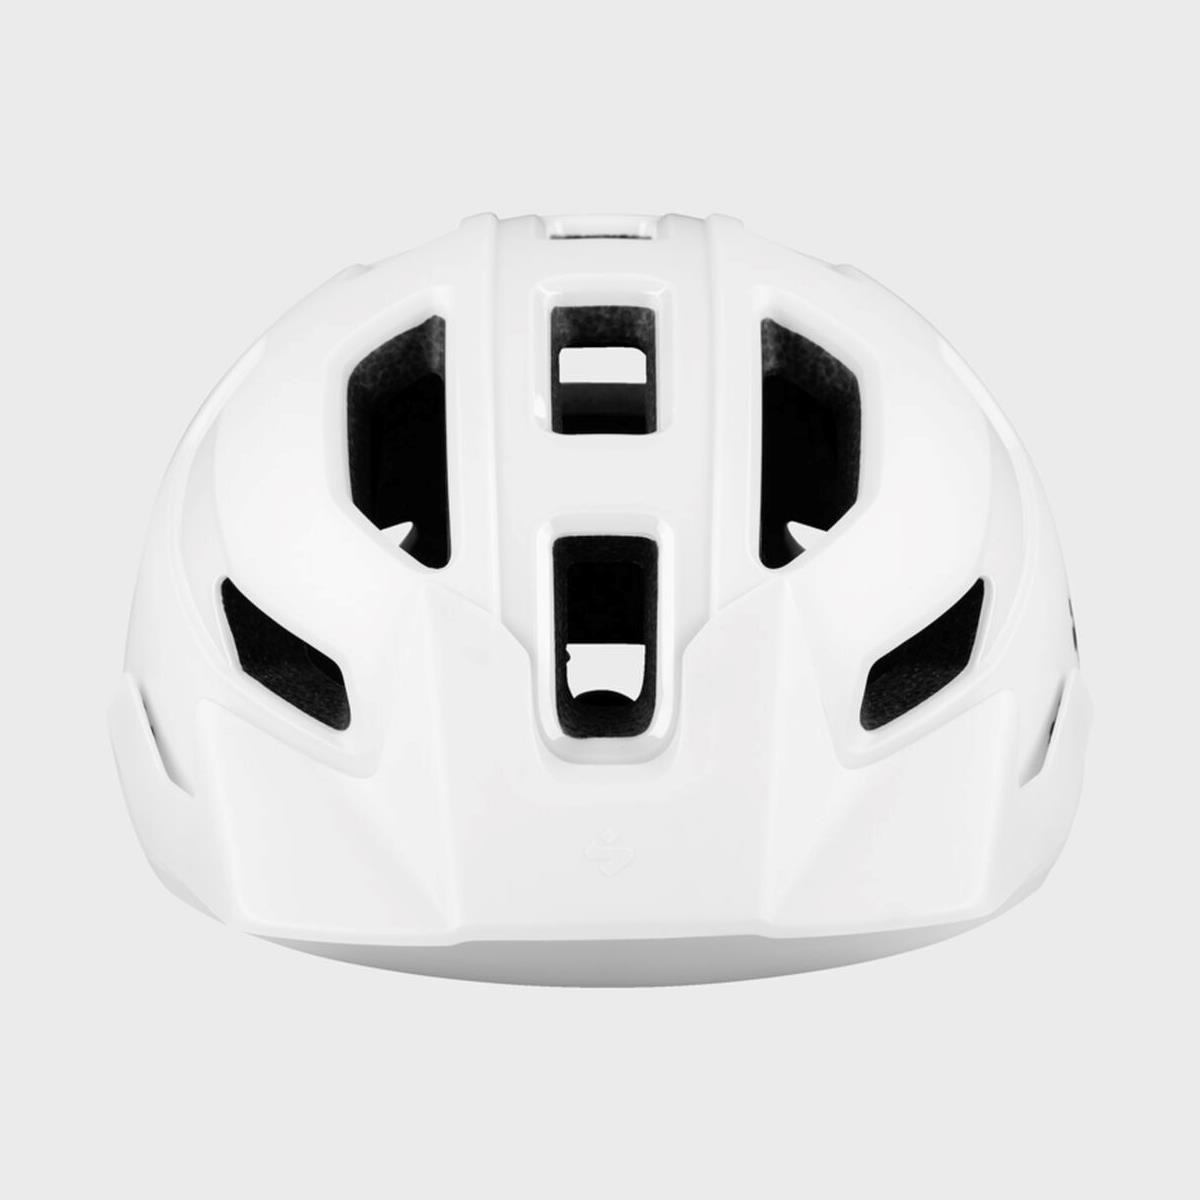 Sweet Protection Ripper Casque Enfant